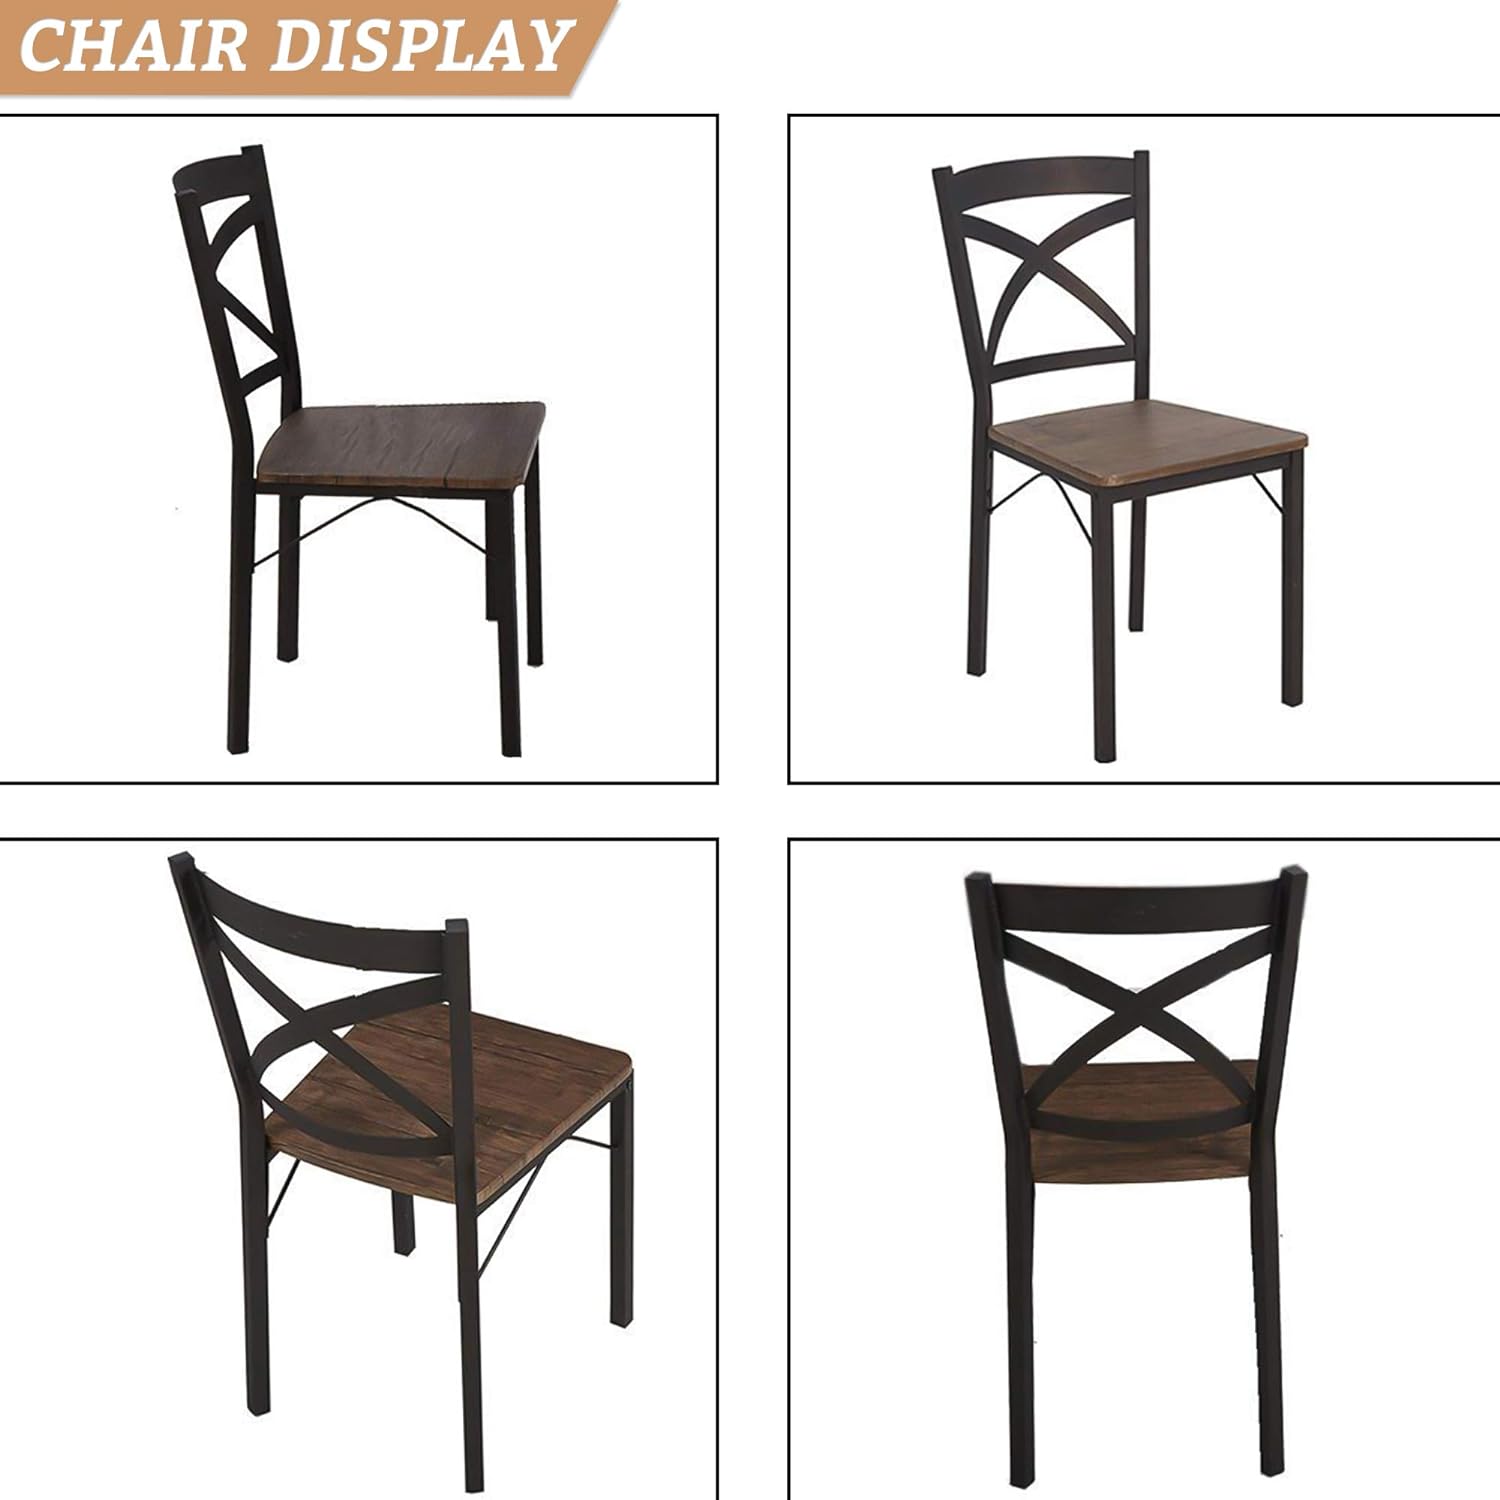 5 Piece Dining Table Set, 1 Dining Table 47.2" for 4 with 4 Dining Chairs Modern Dinette, Metal Backrest